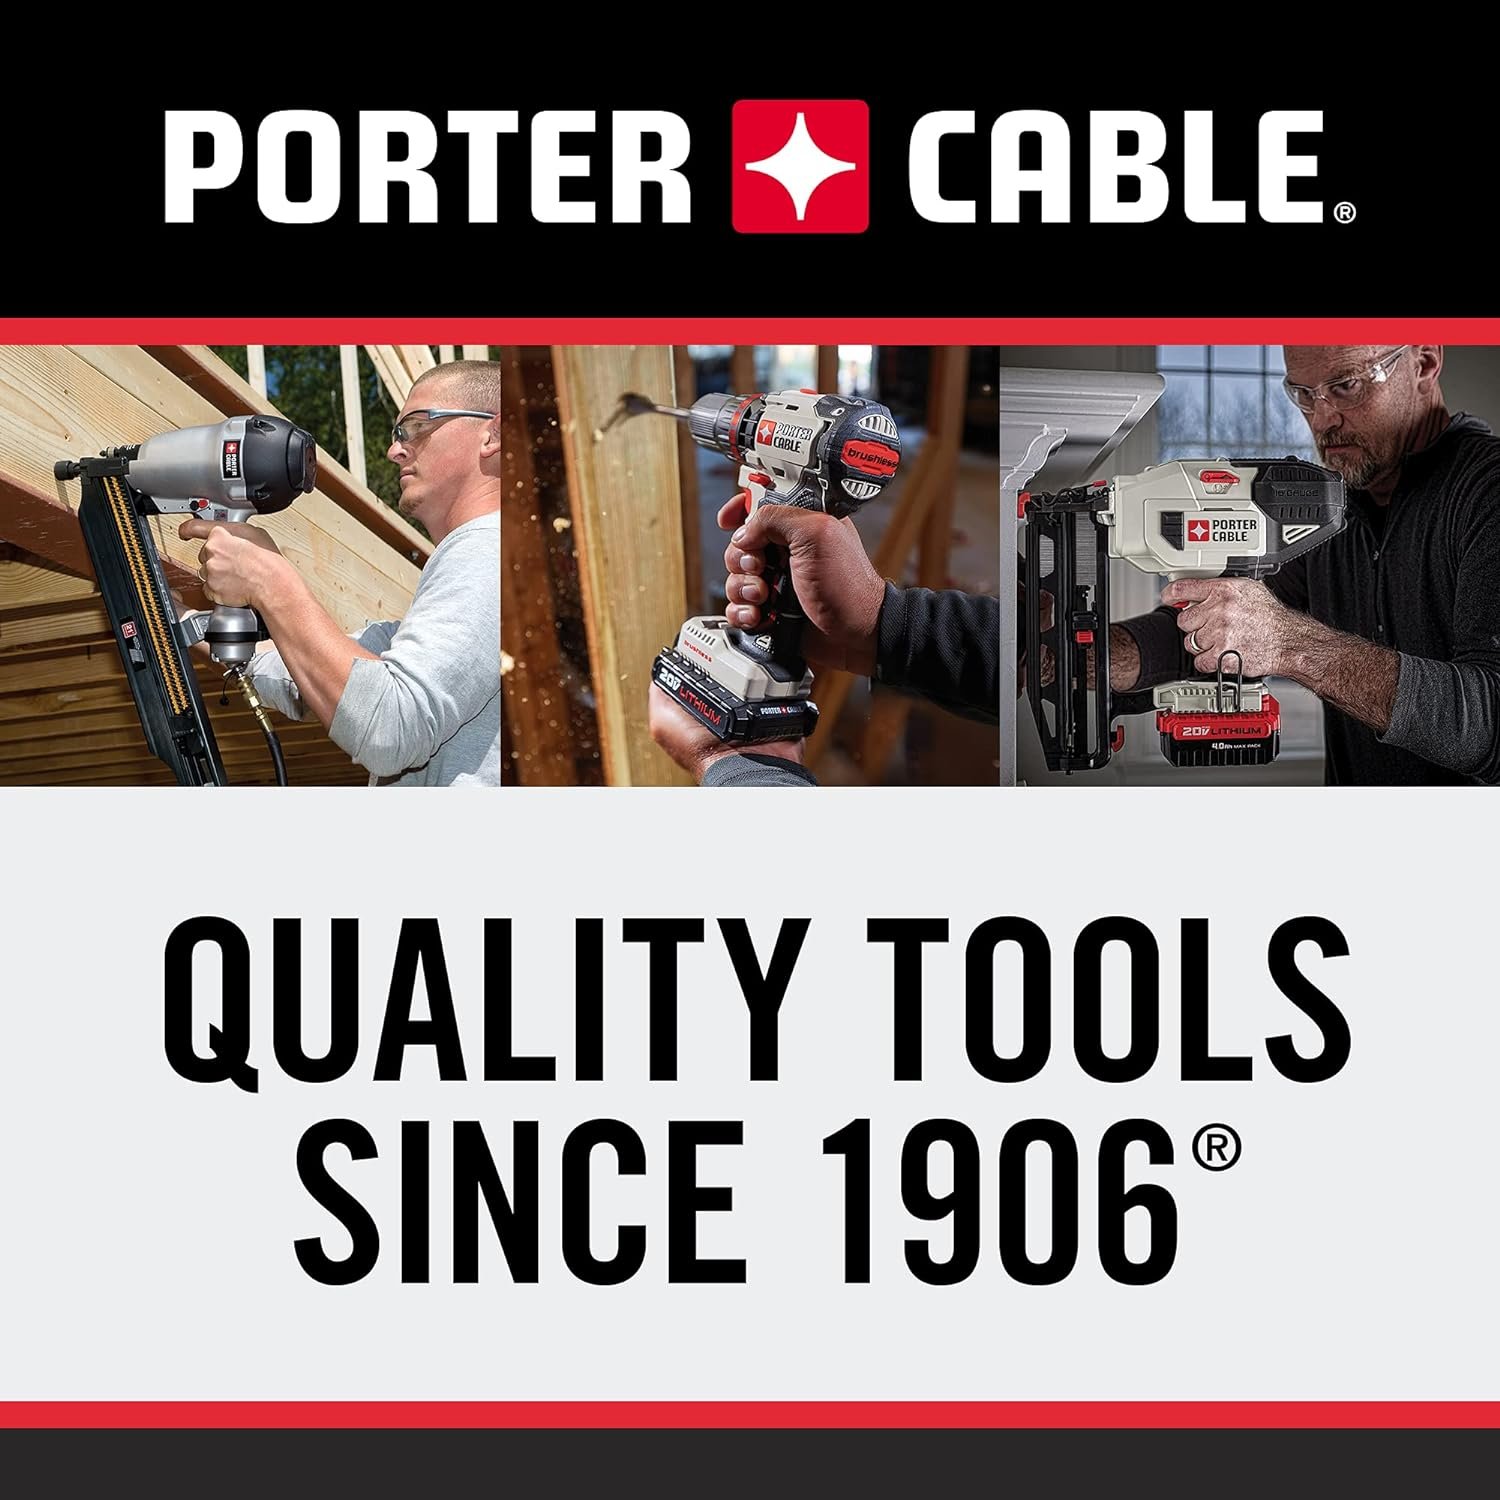 PORTER-CABLE 20V MAX Cordless Drill and Impact Driver Review